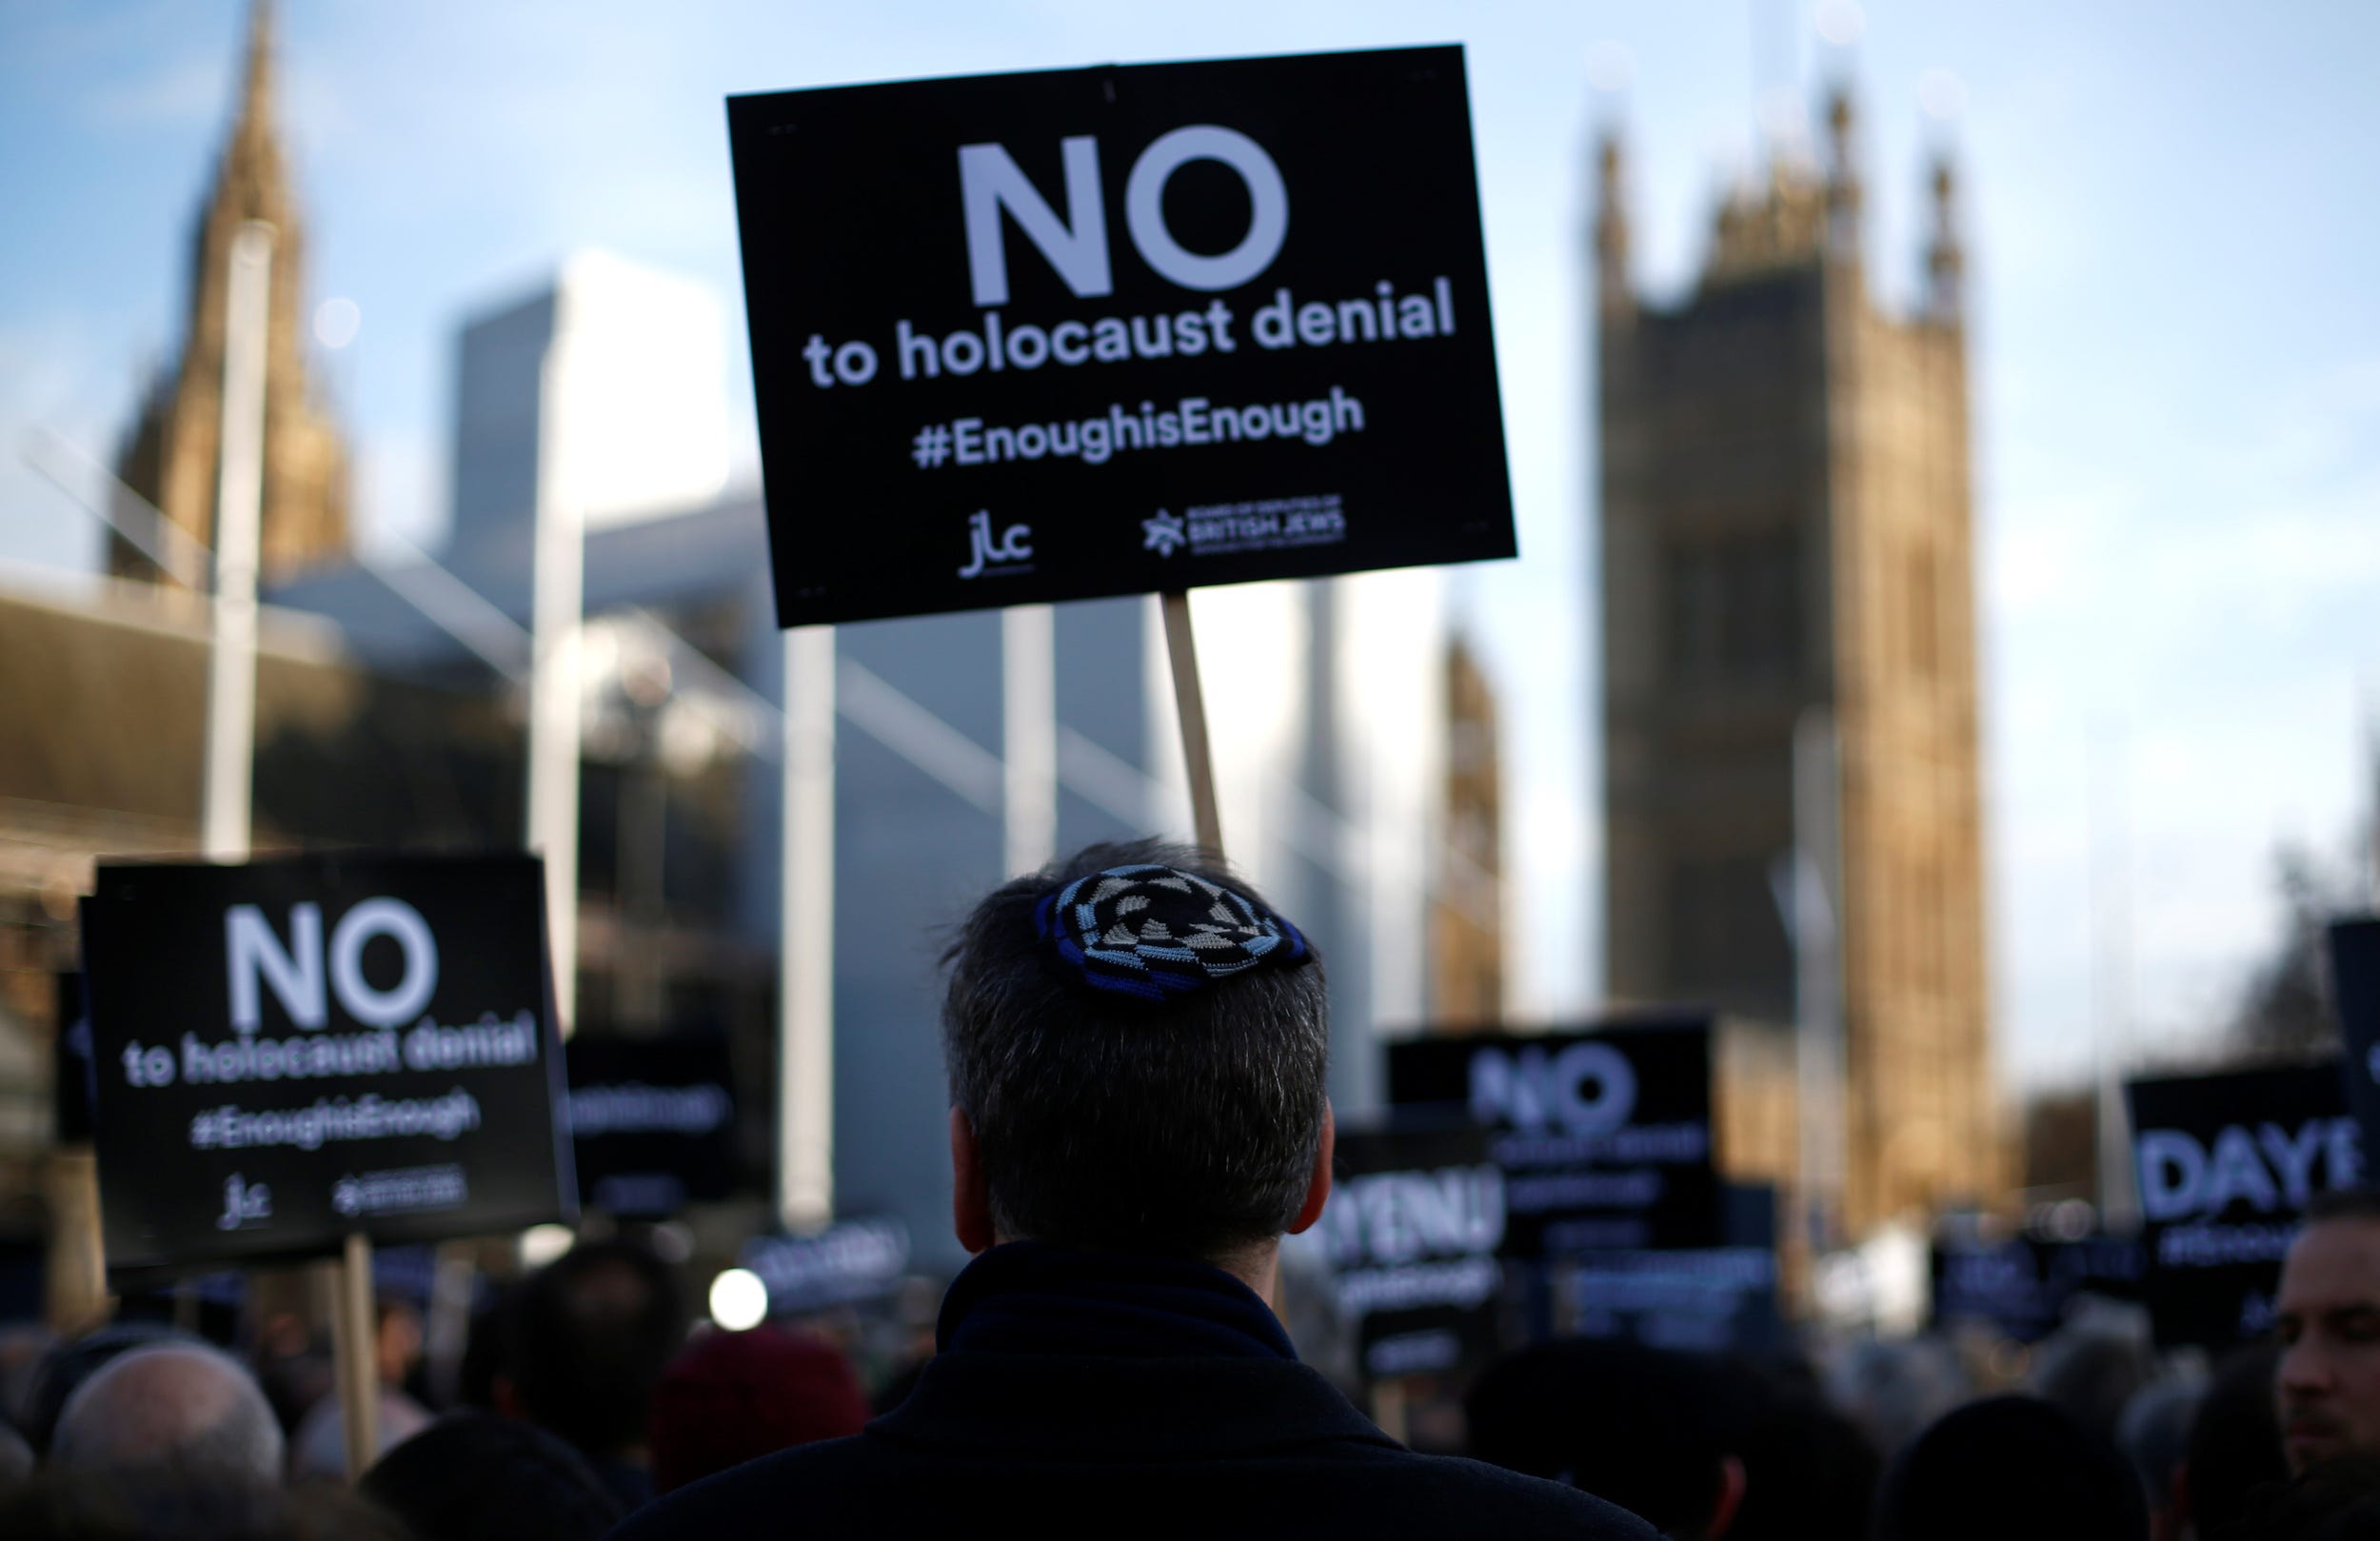 Protesters hold placards and flags during a demonstration, organised by the British Board of Jewish Deputies for those who oppose anti-Semitism, in Parliament Square in London, Britain, March 26, 2018.